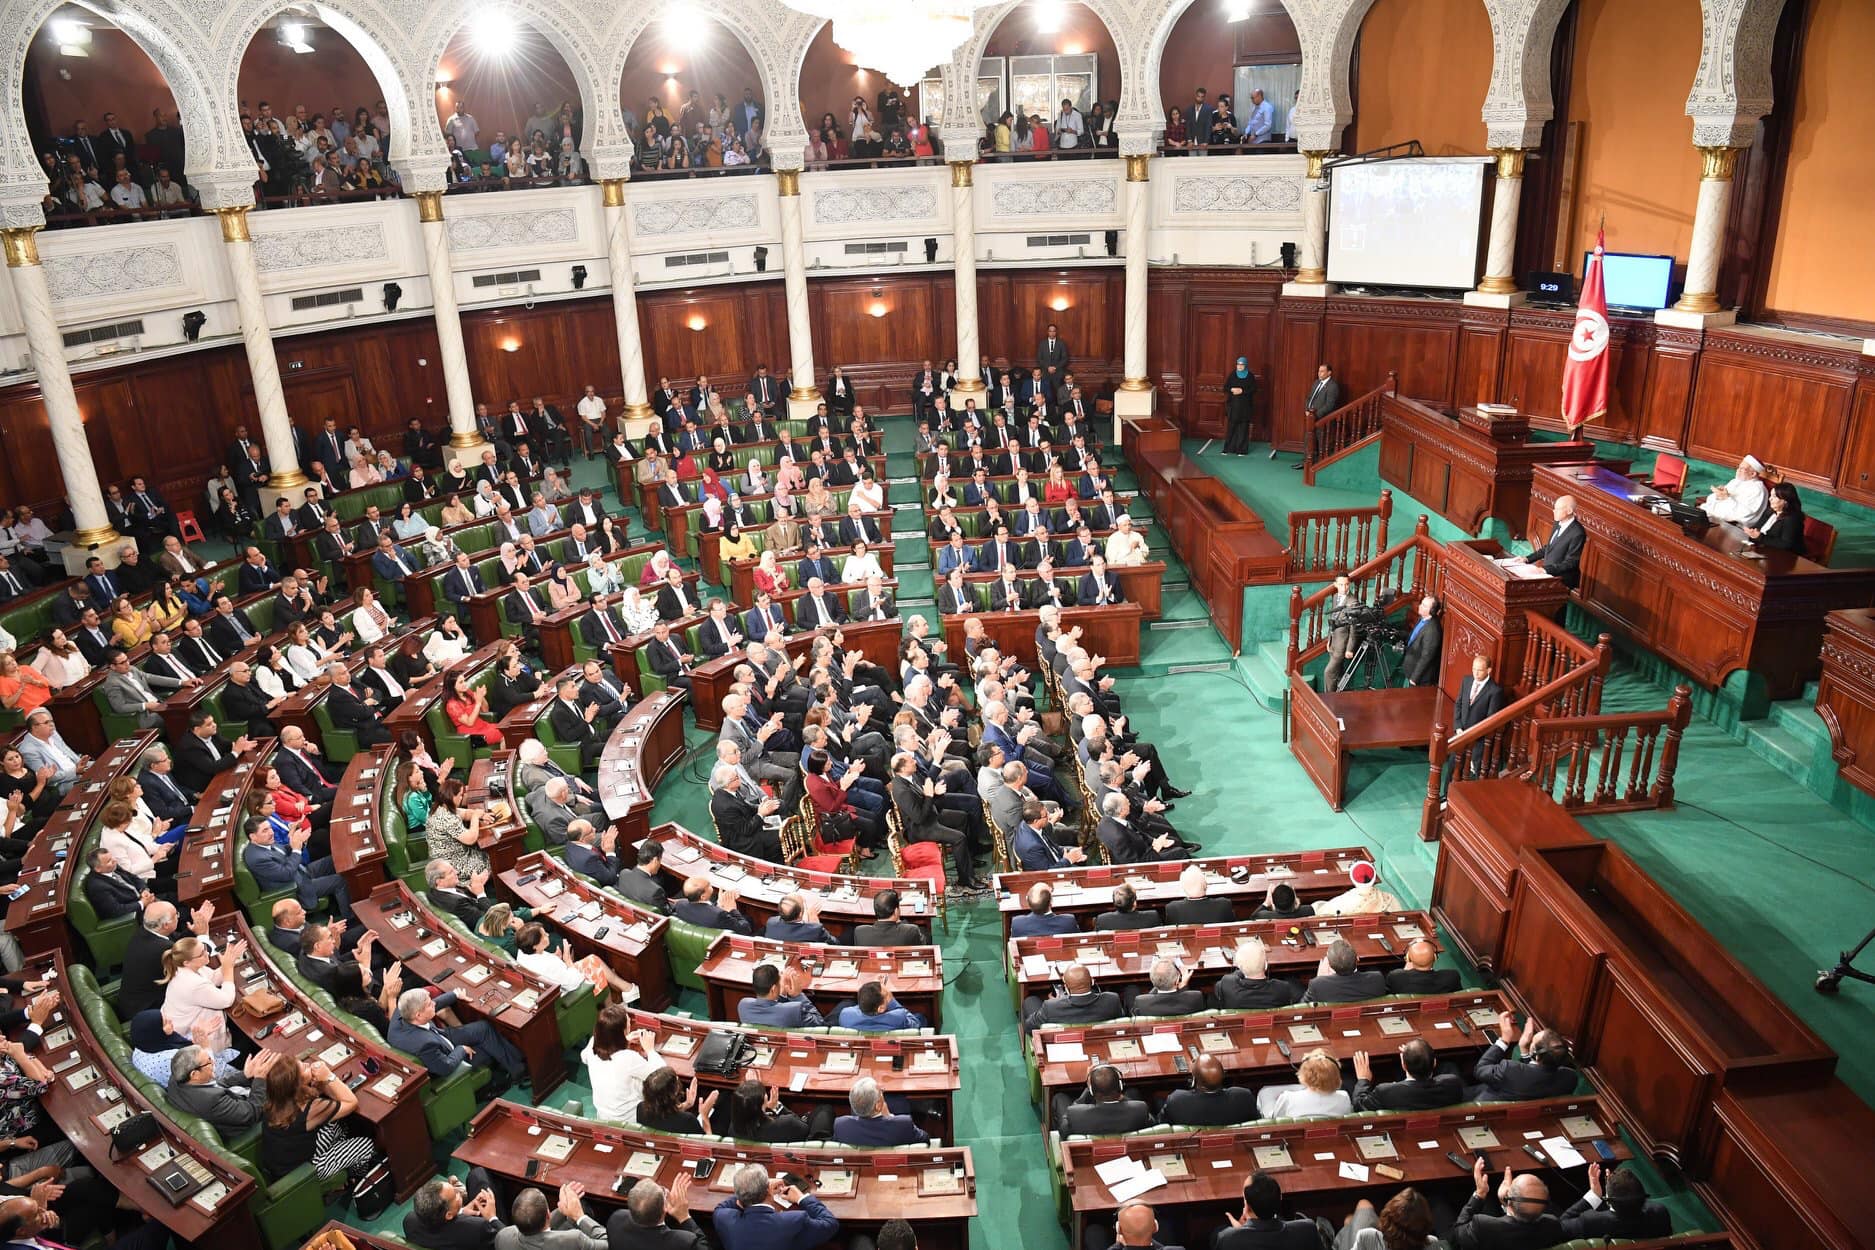 The tunisian Parliament during the first speech of the President Kais Said 